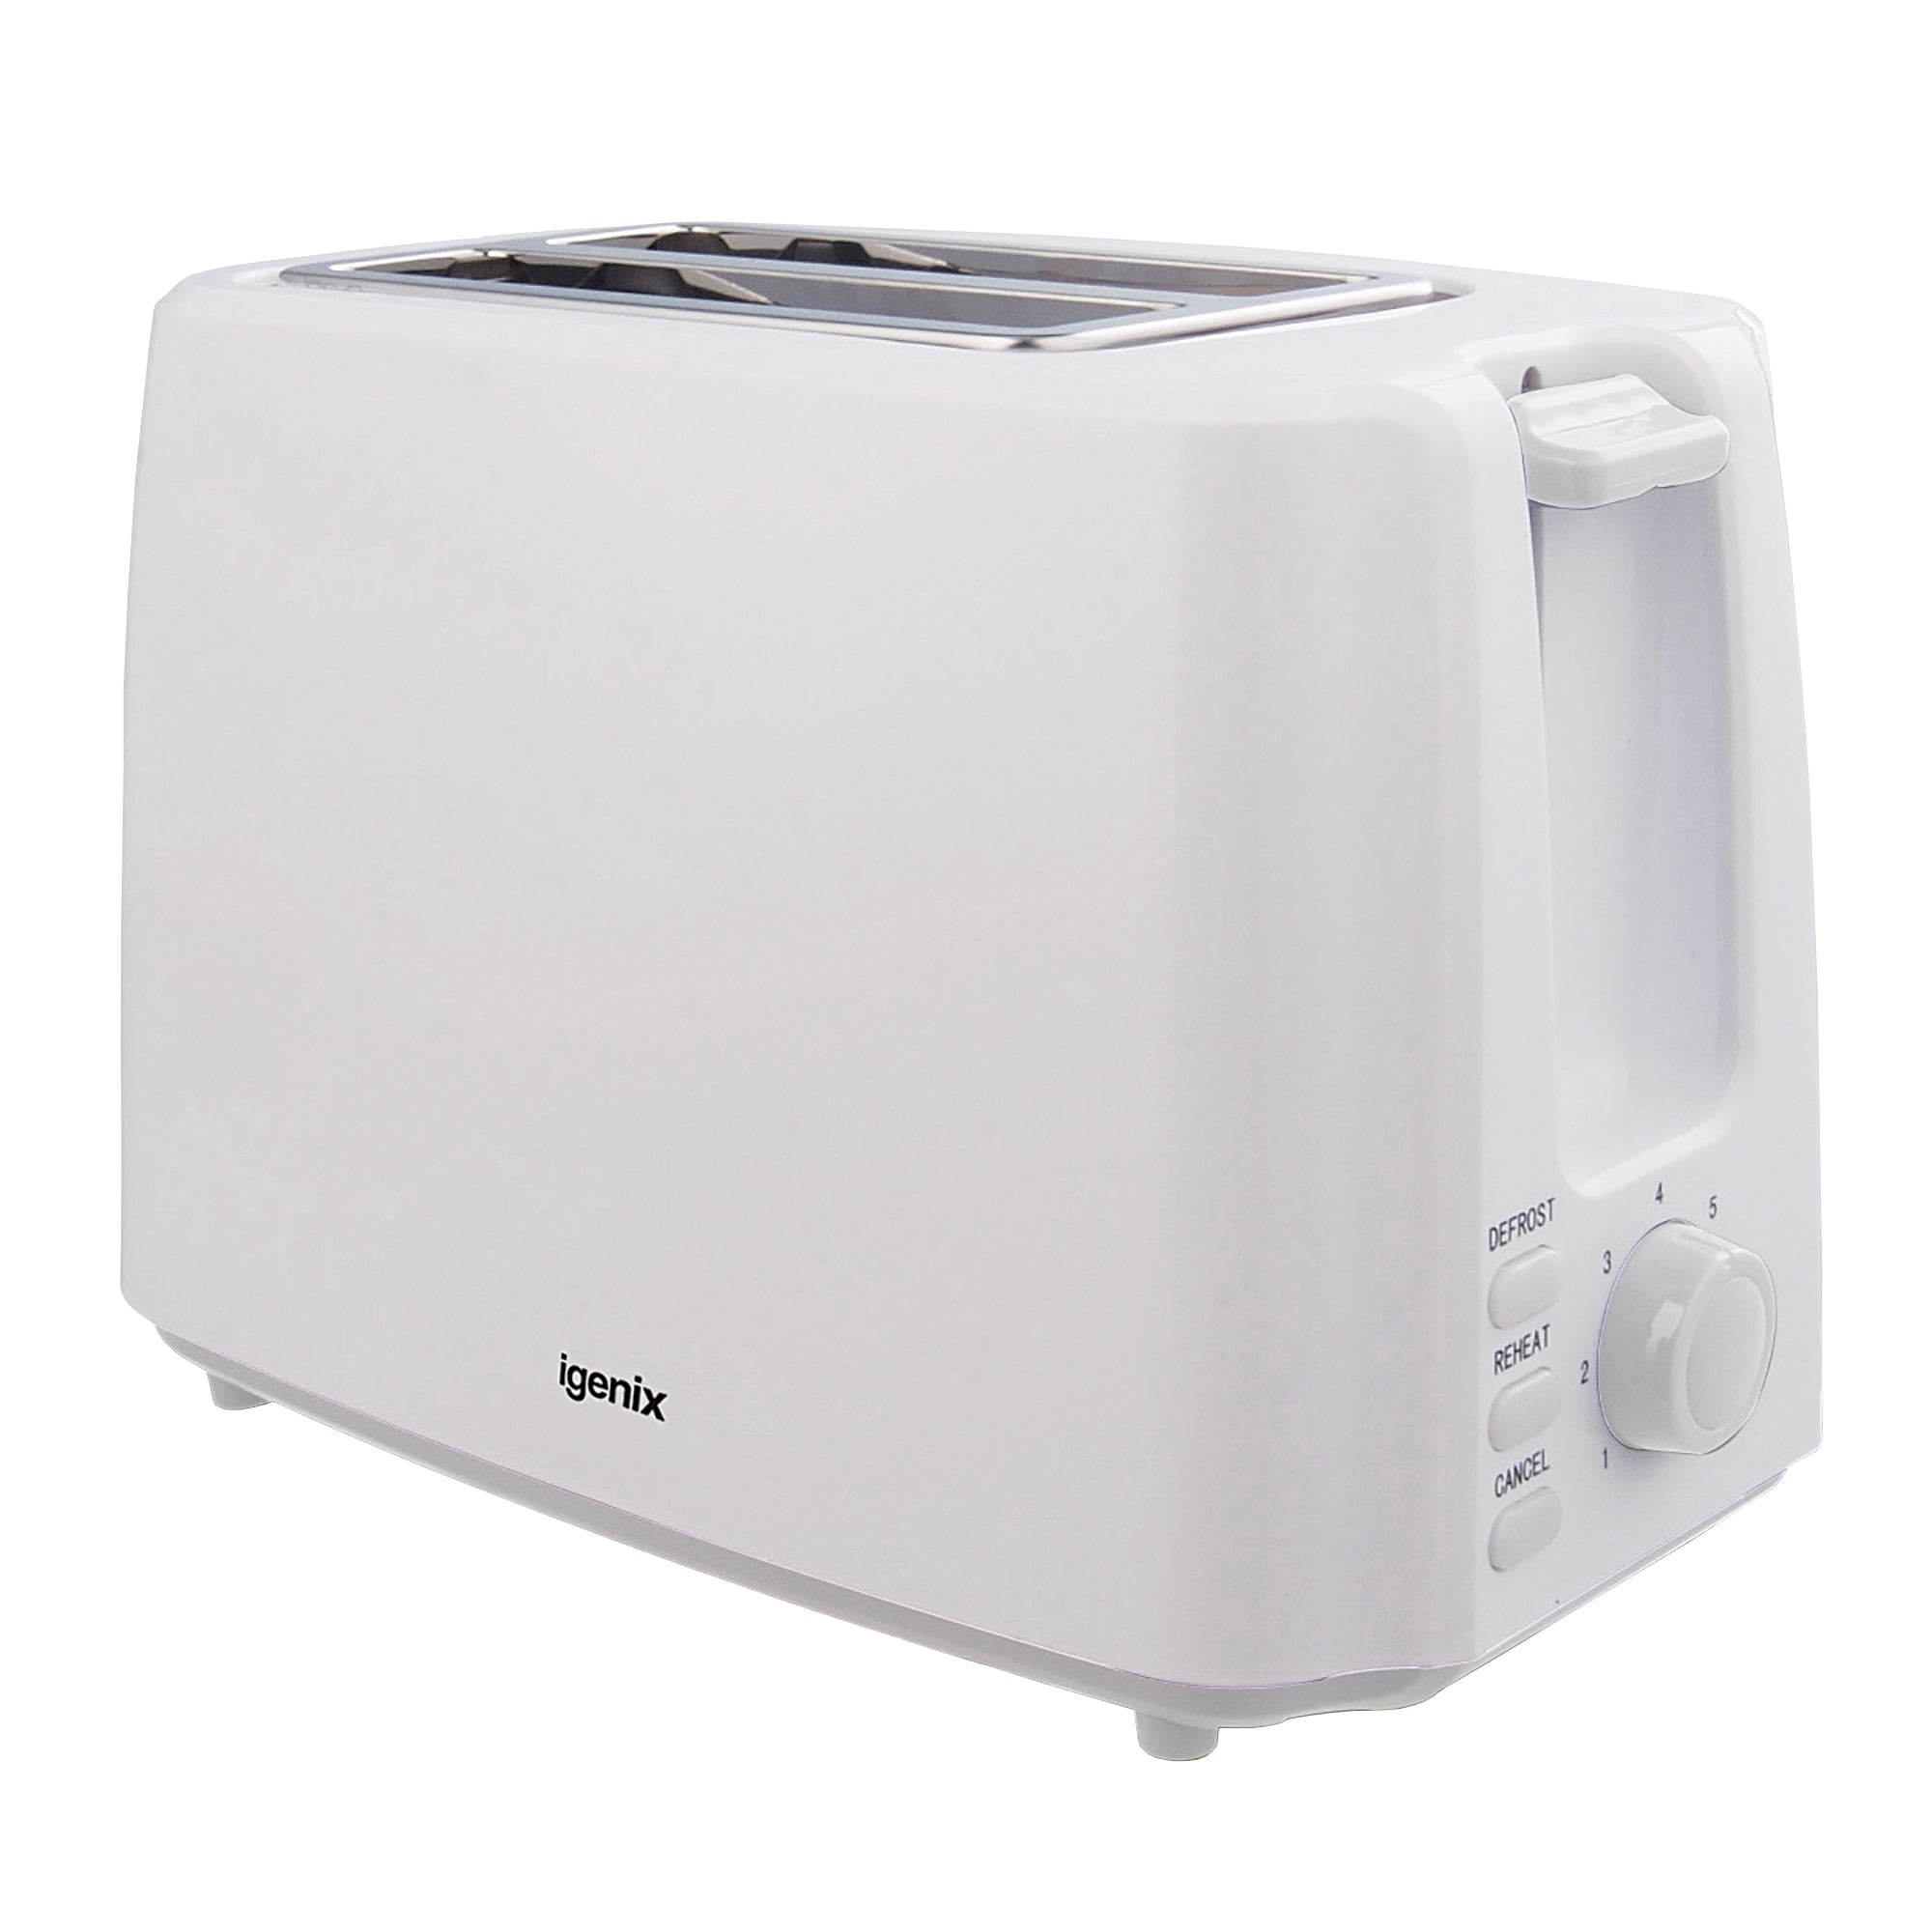 2 Slice Toaster, Defrost & Reheat Function, White